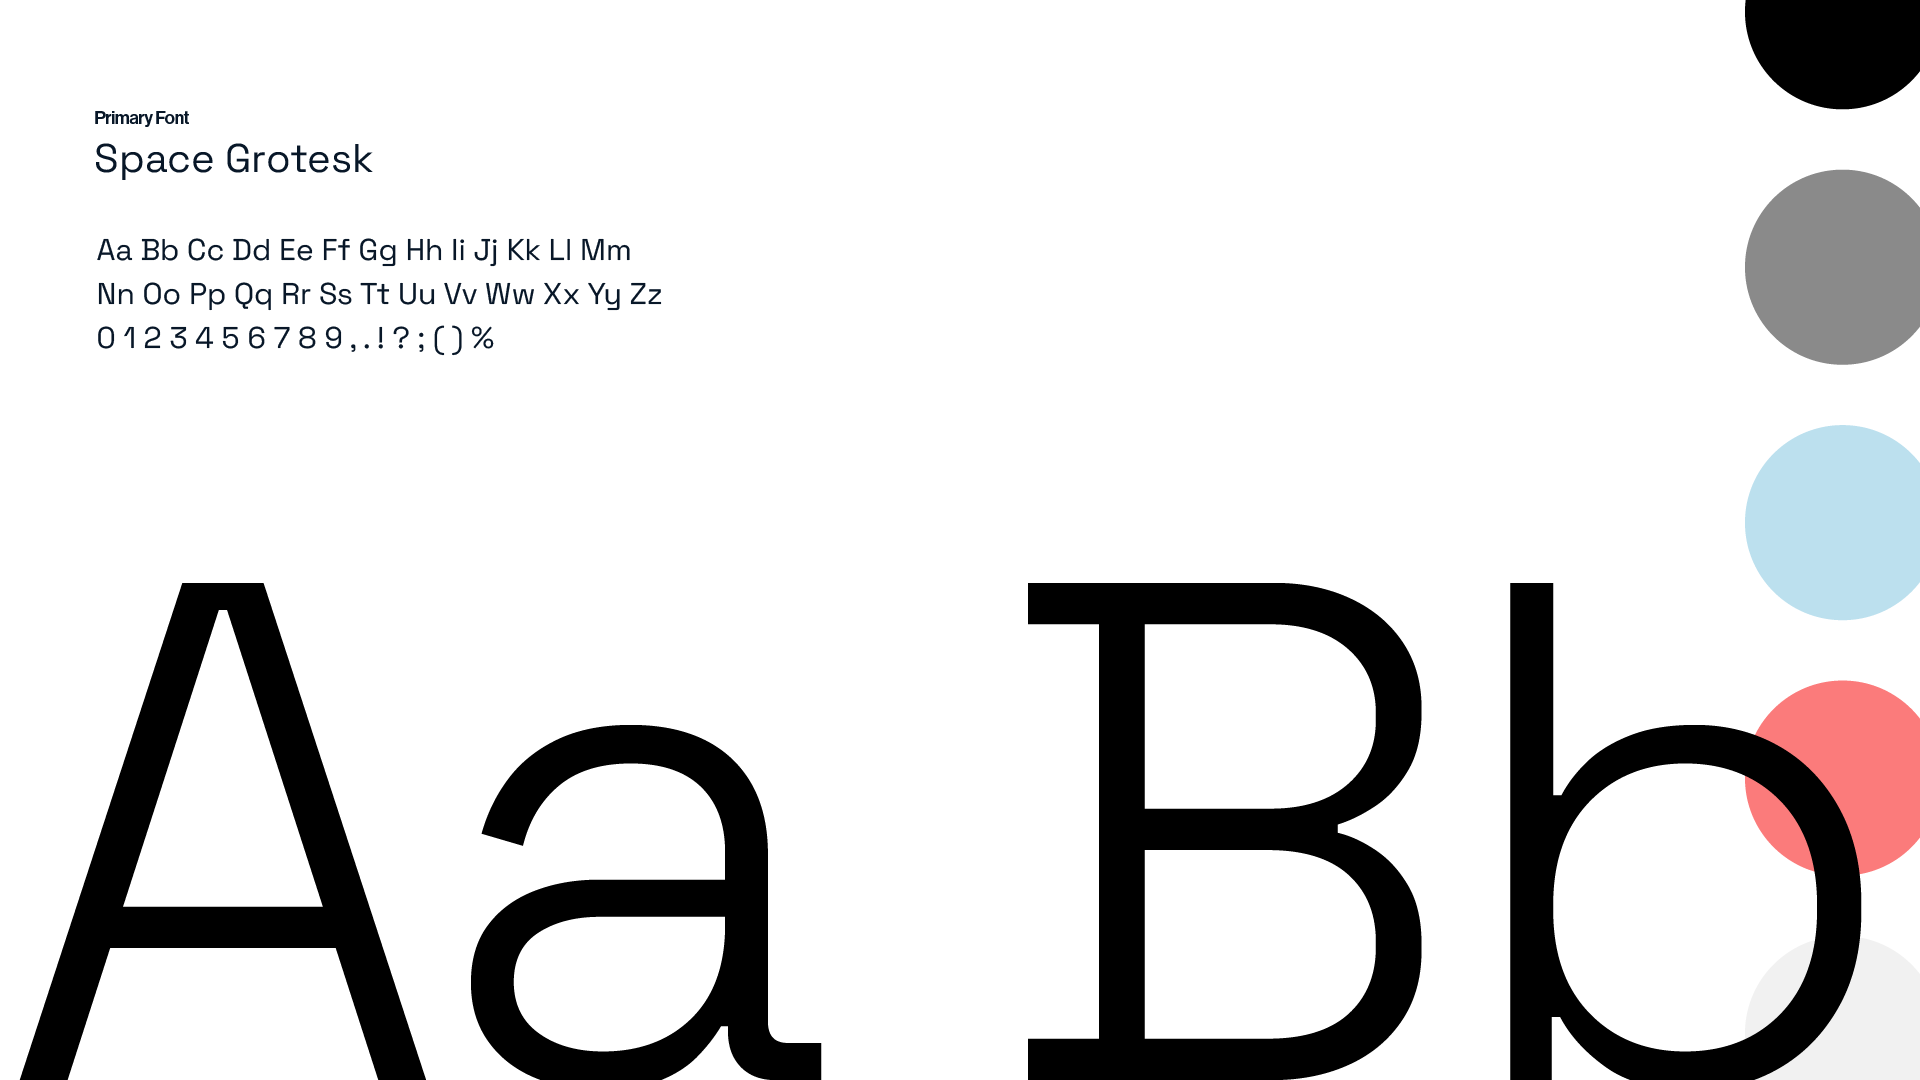 Artly’s primary text is titled “Space Grotesk.” The font is medium weight with clean lines.